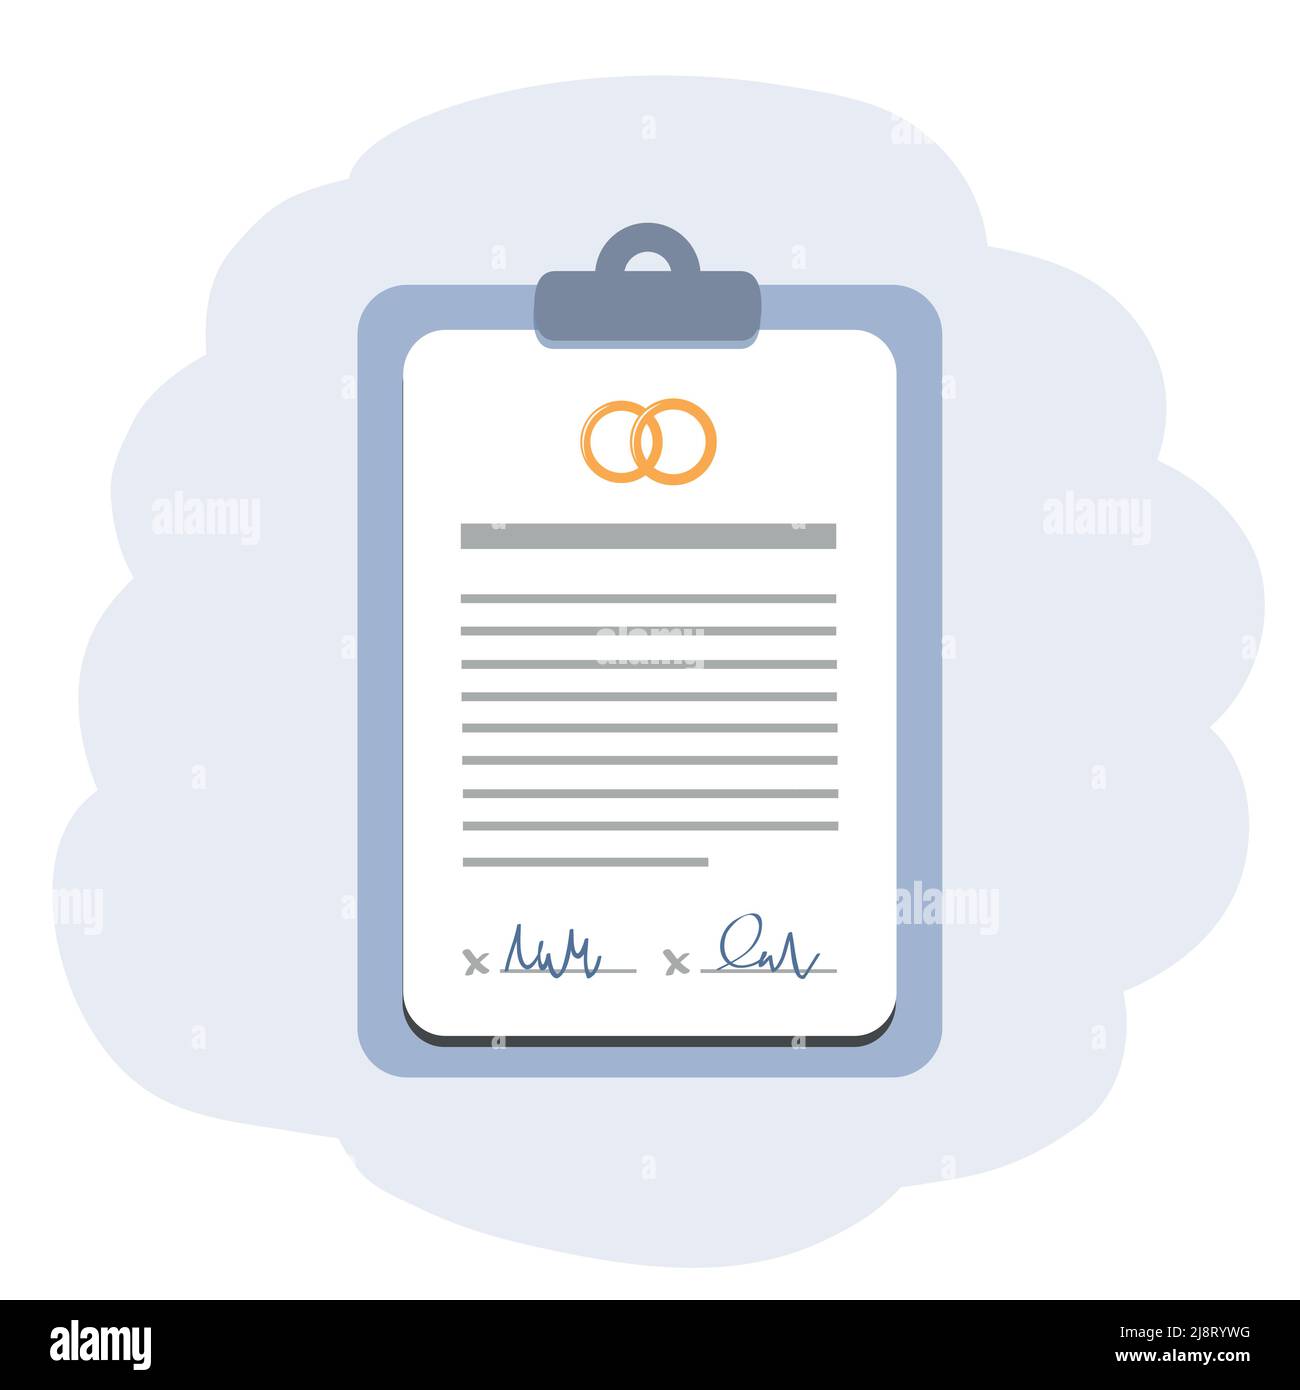 marriage contract info graphic with clip board Stock Vector